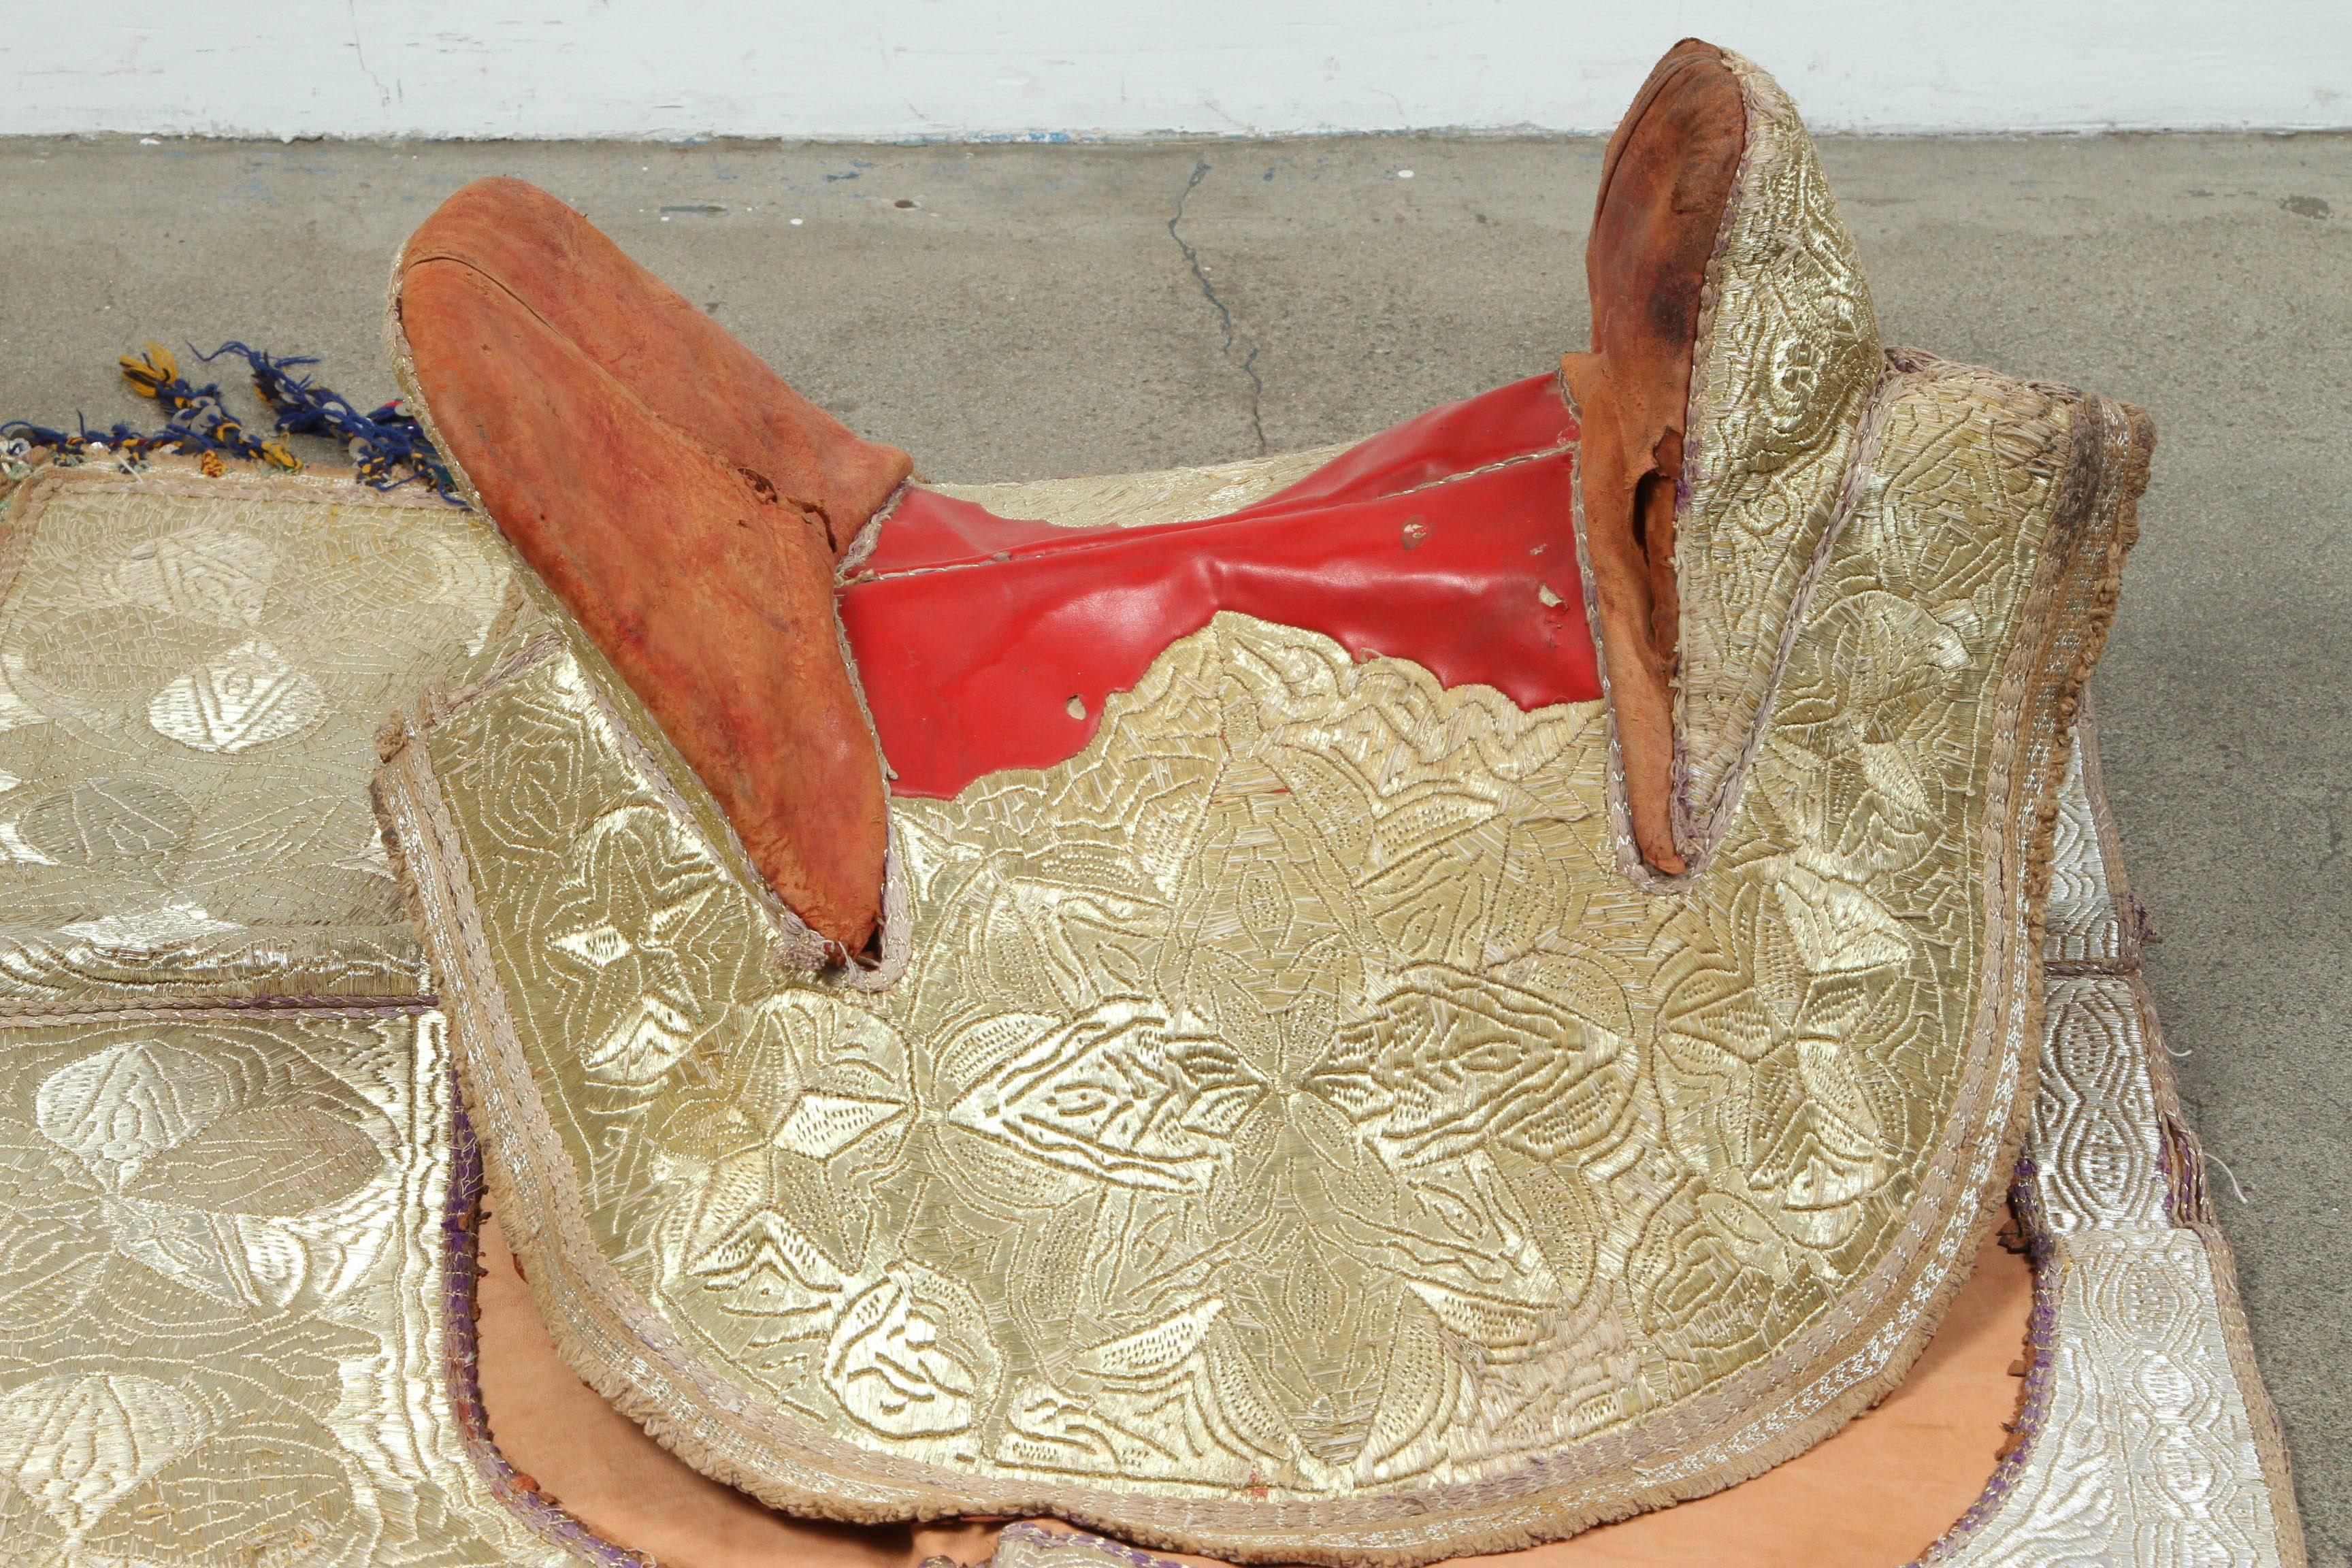 Handcrafted Moroccan horse saddle set made for a ceremonial Festival and shows, the entire ensemble elaborately embroidered overall in gold threads, comprising of a saddle cover, saddle pad and wooden raw saddle, the central section of the saddle